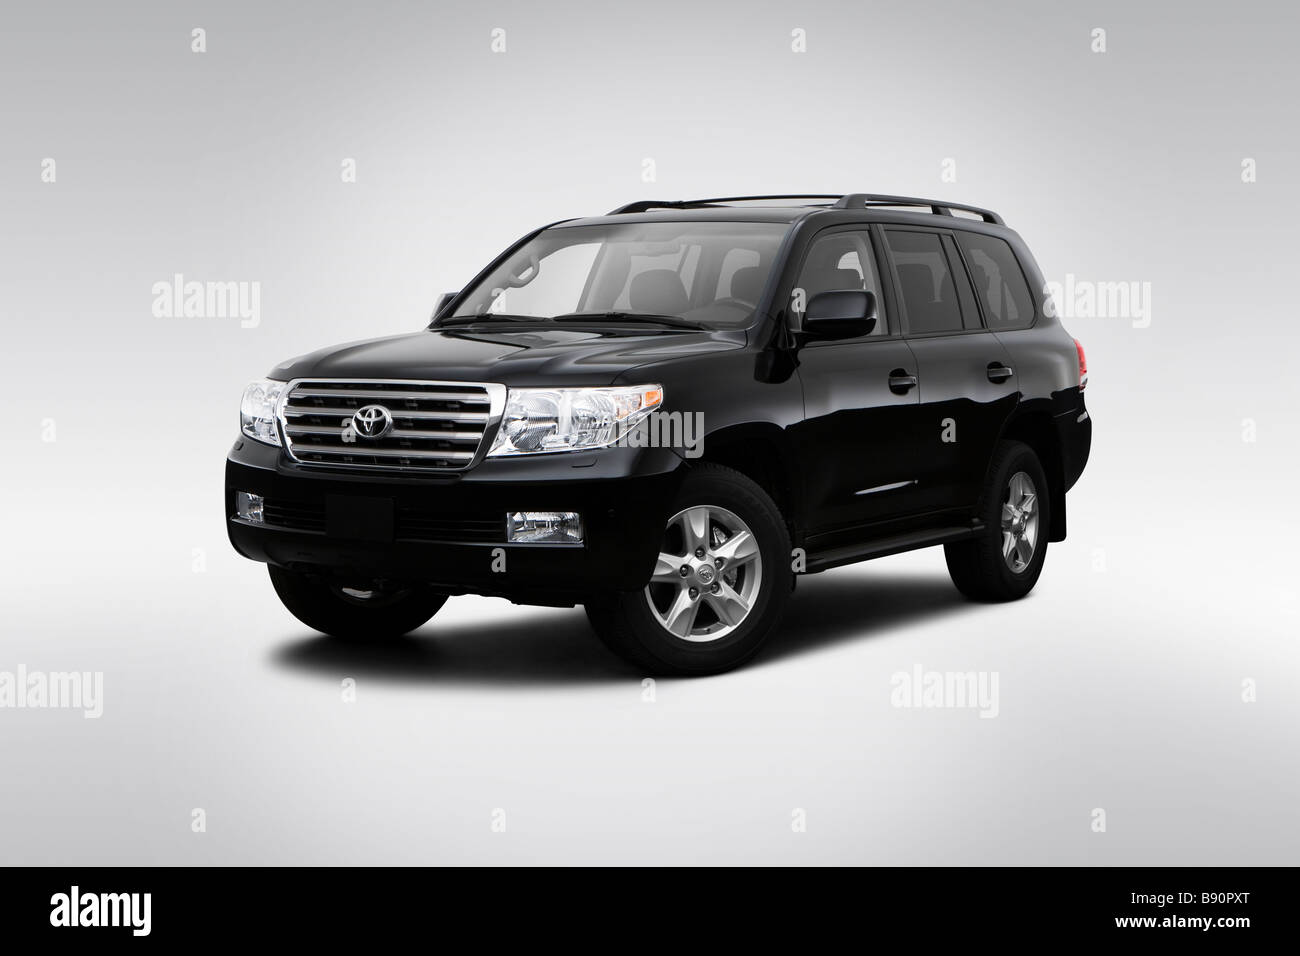 2009 Toyota Land Cruiser in Black - Front angle view Stock Photo - Alamy